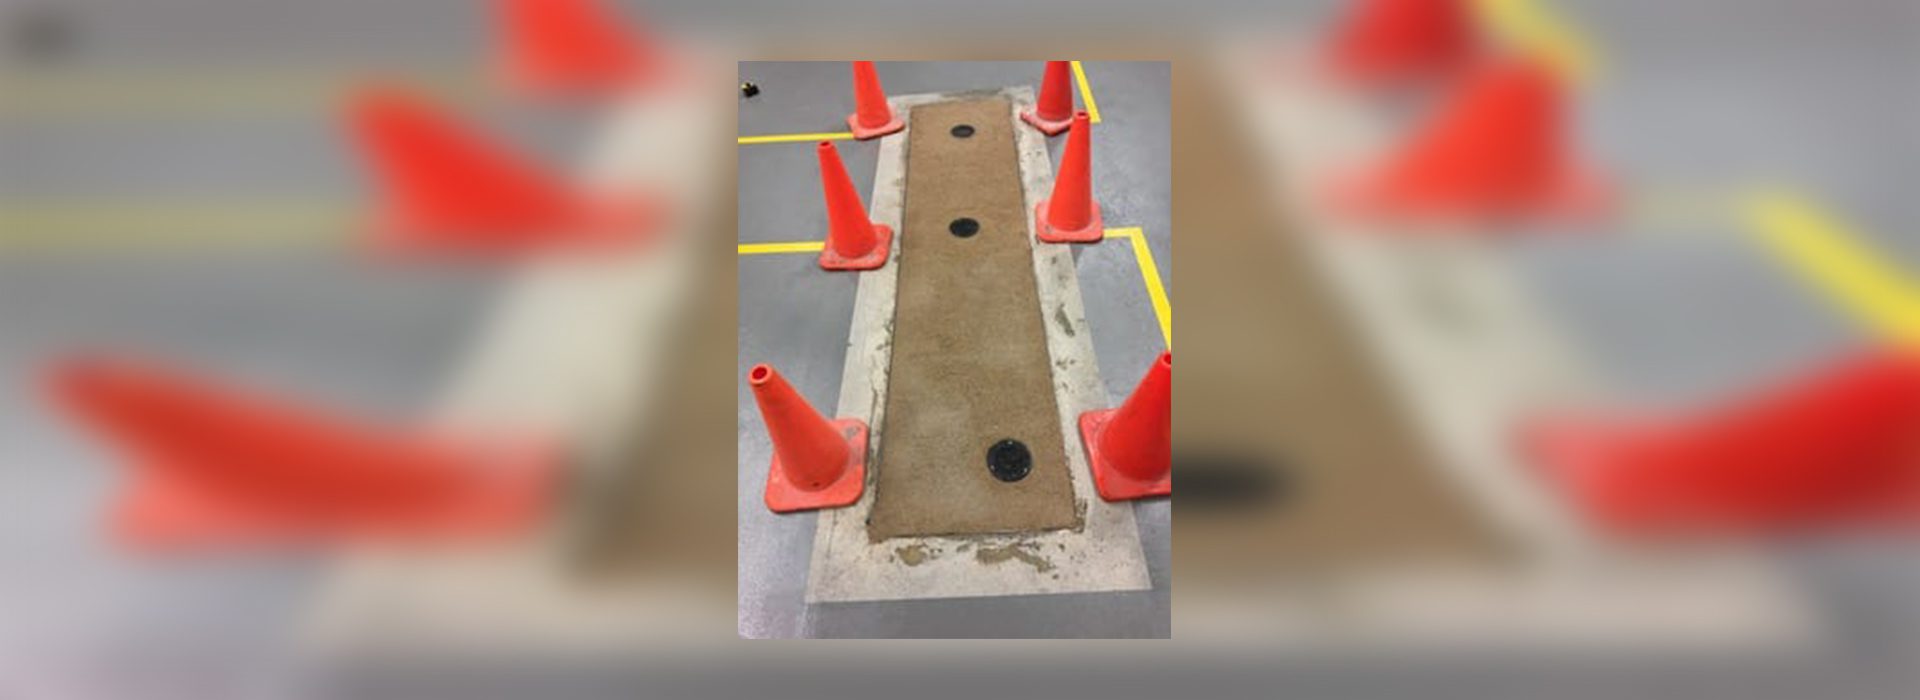 A hole in the ground with orange cones around it.